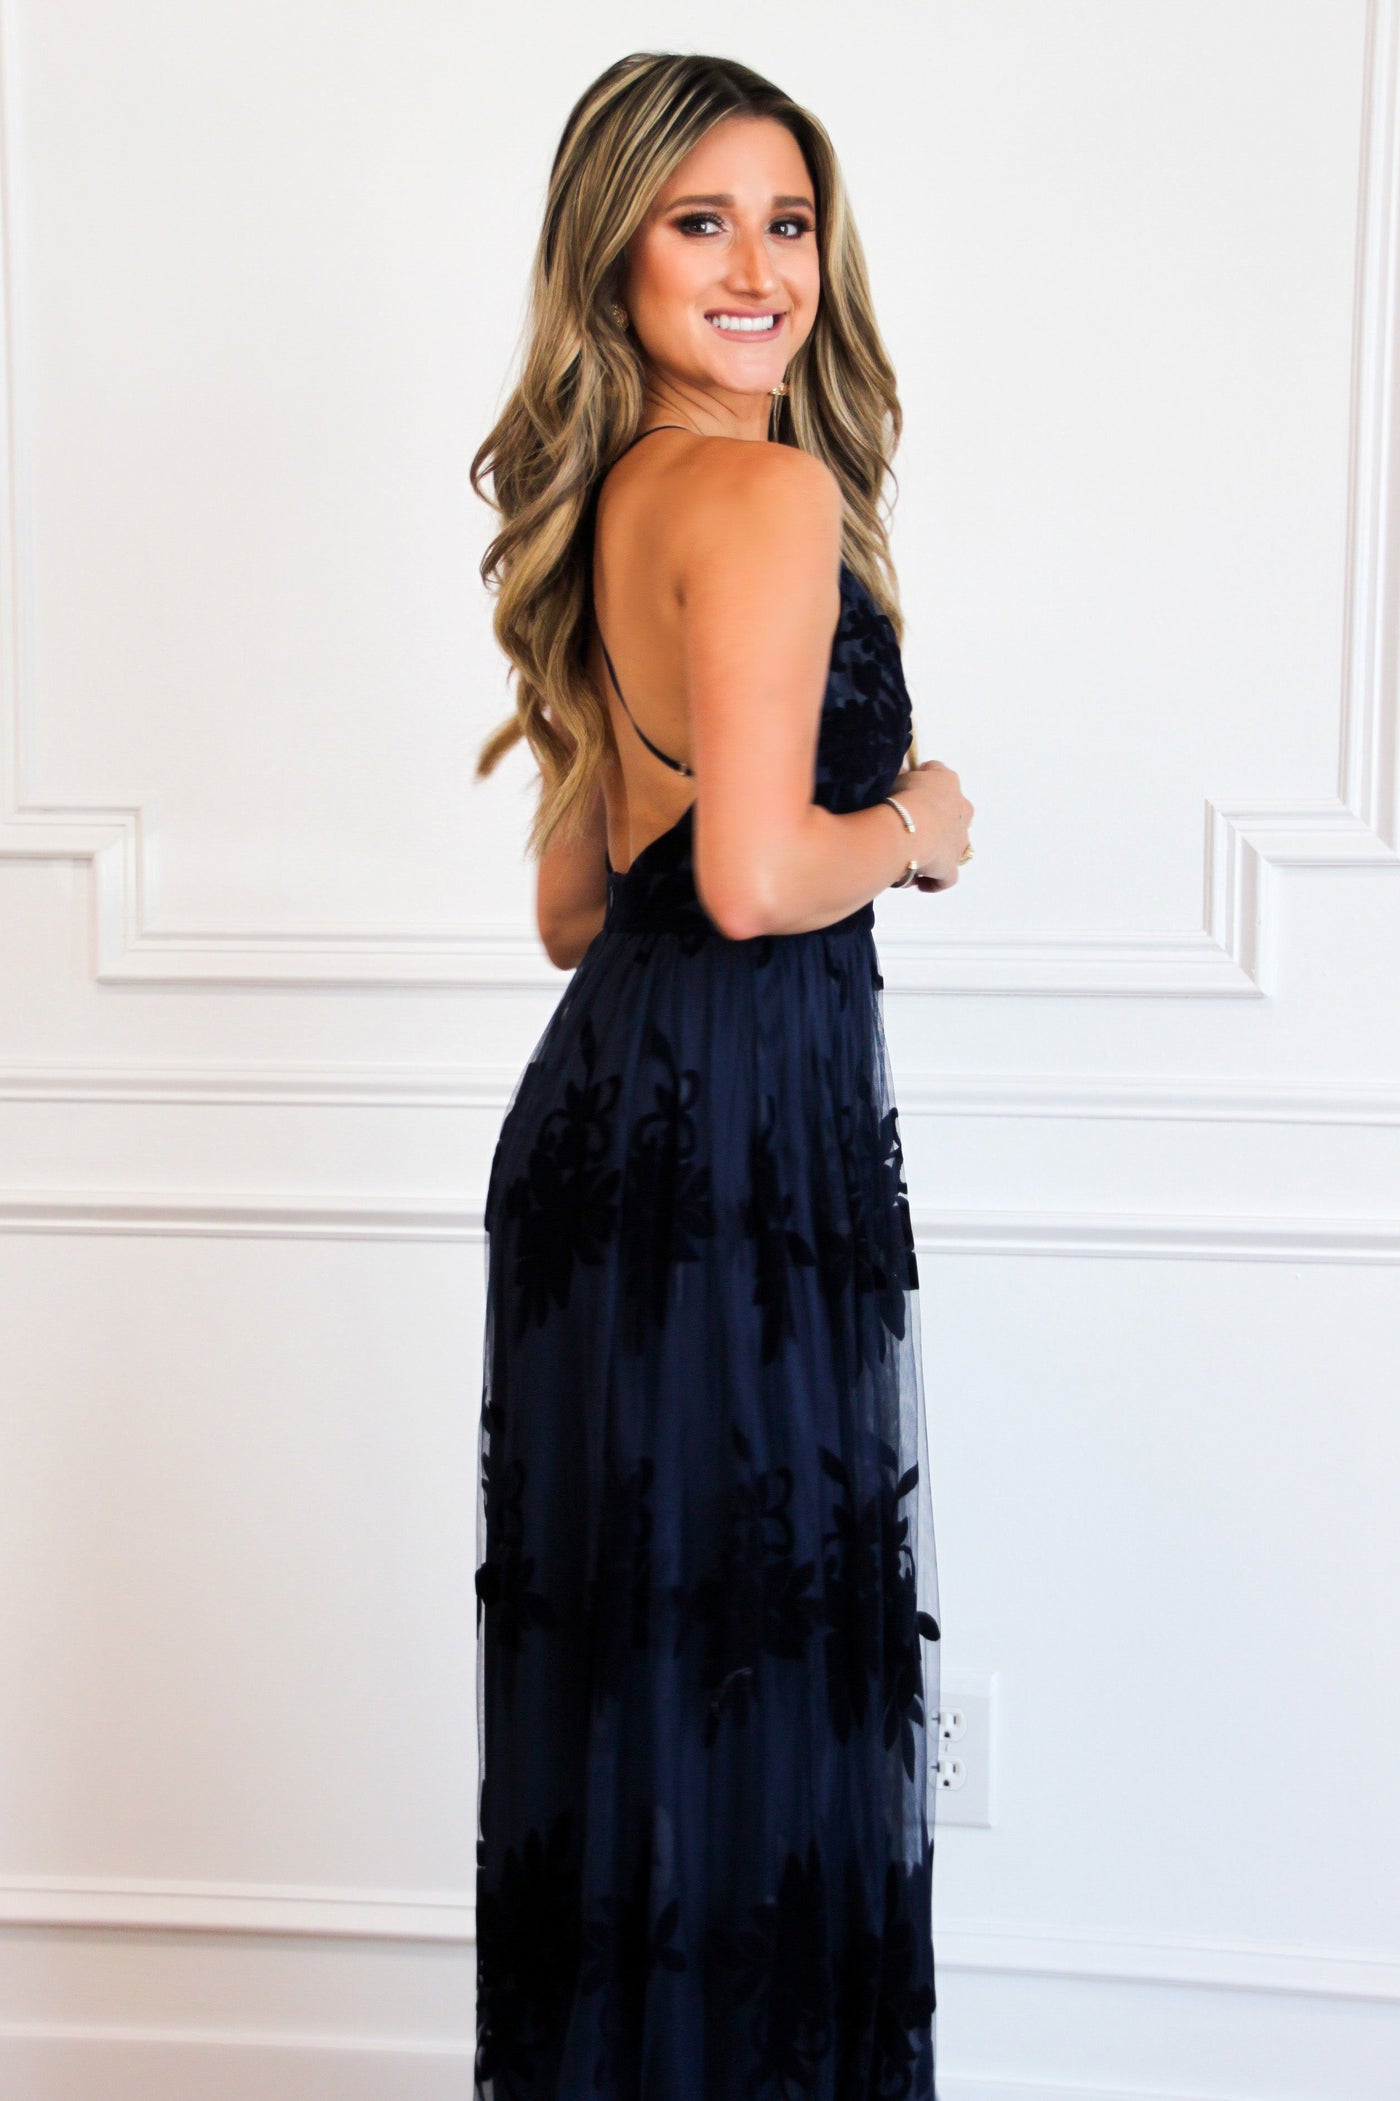 RESTOCK: Here Comes the Bride Maxi Dress: Navy - Bella and Bloom Boutique